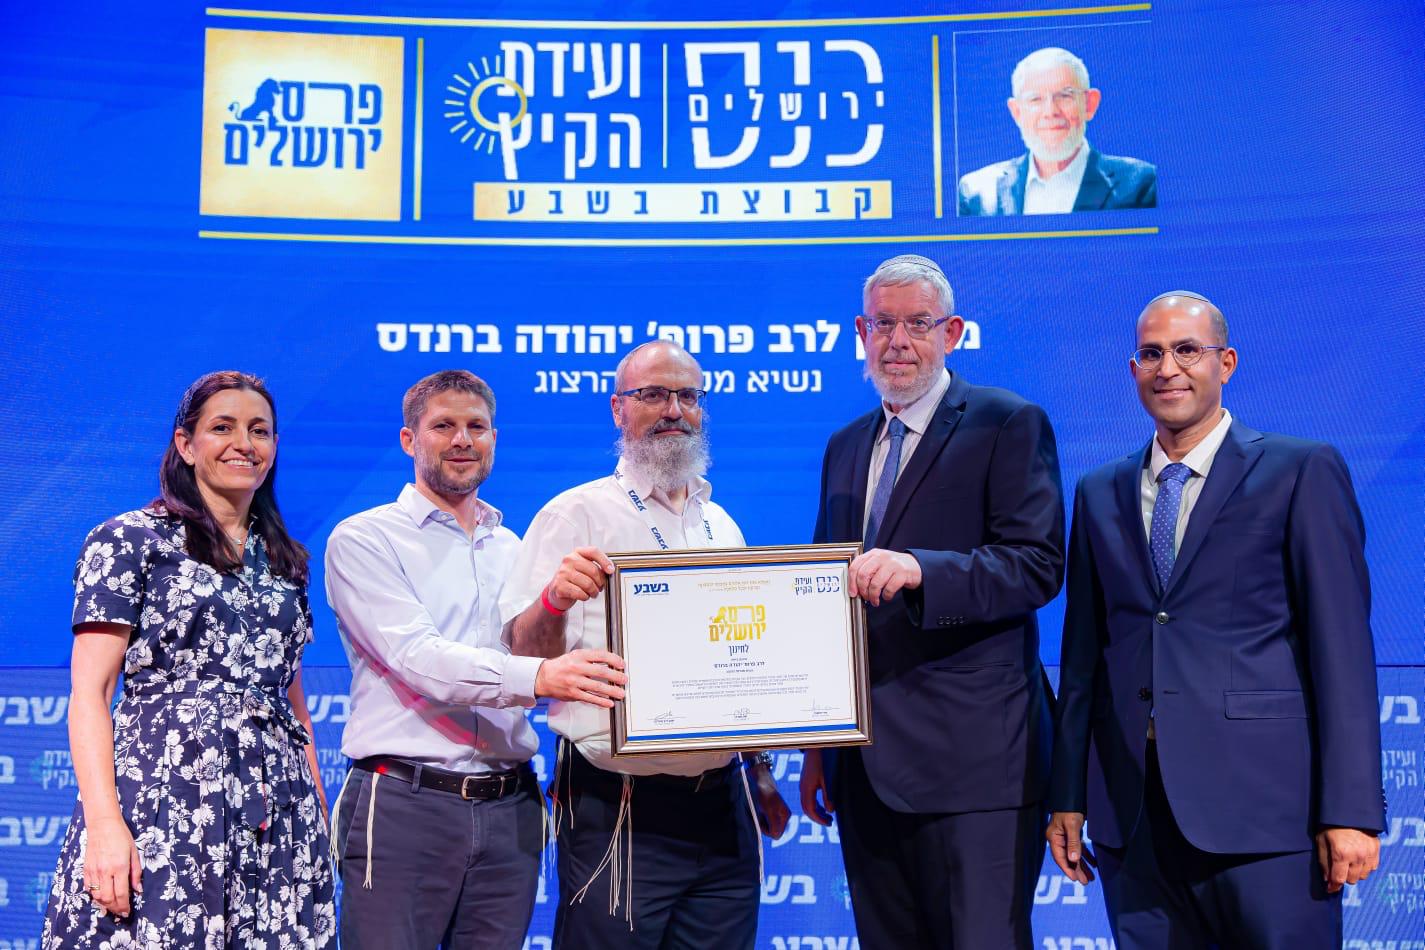 Rabbi Dr. Yehuda Brandes receives his prize from Dudi Finkler and Emanuel Shilo from B'Sheva and MK Betzalel Smotrich. 